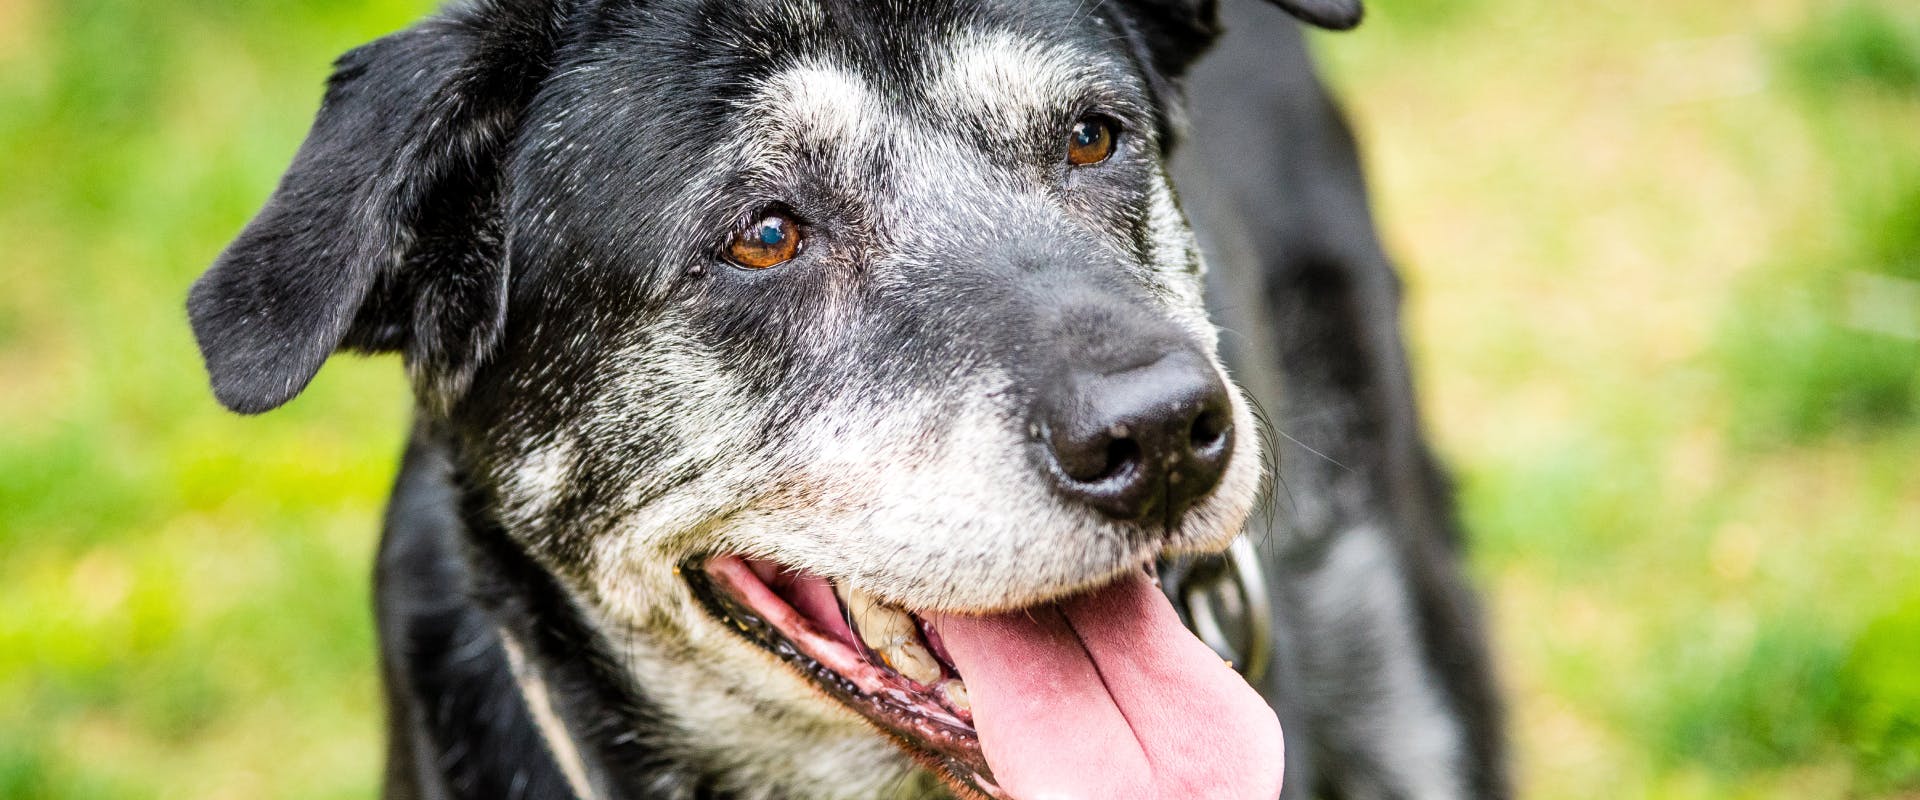 a elderly black dog looking up past the camera while panting